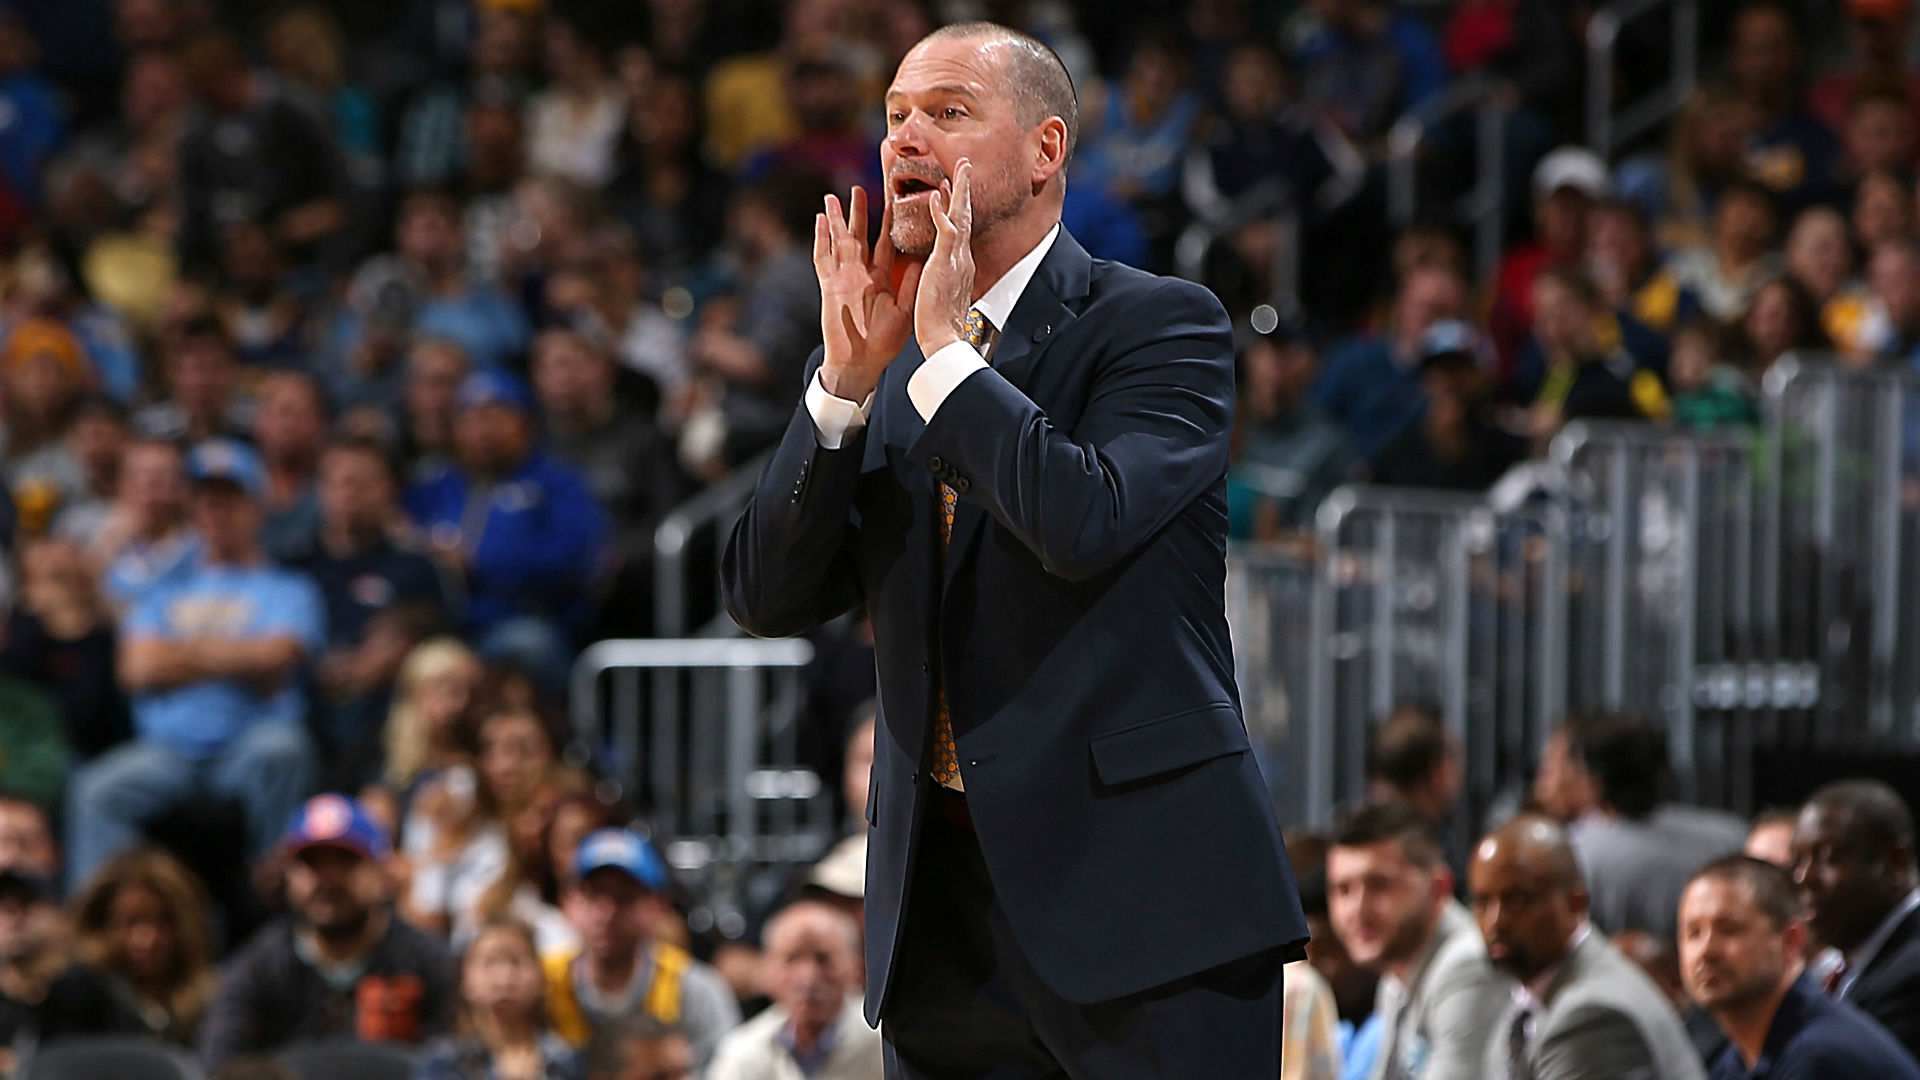 The Denver Nuggets have won at least 40 games in each of their past two seasons under coach Michael Malone, who has signed a new deal.